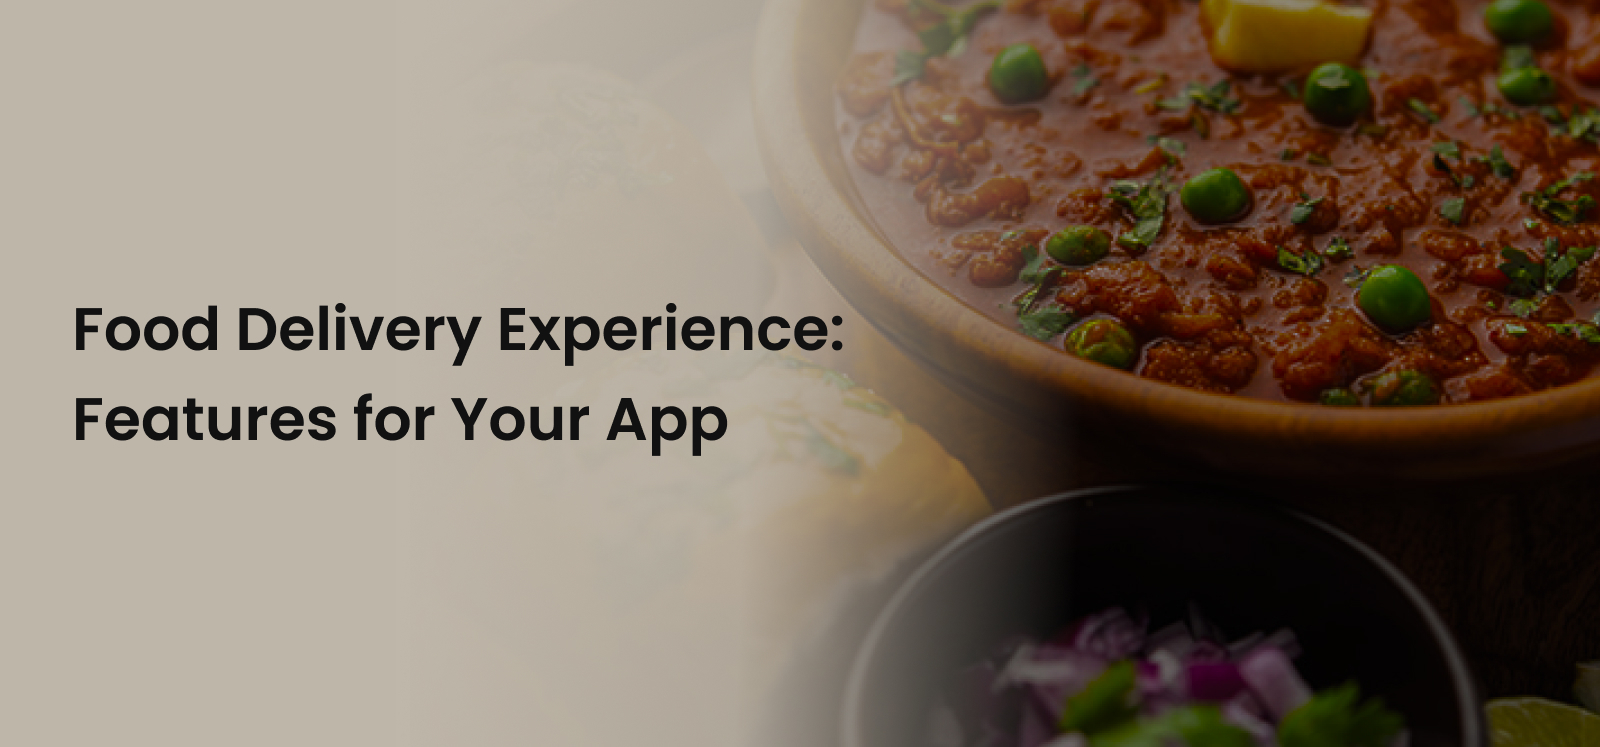 Food Delivery Experience: Features for Your App